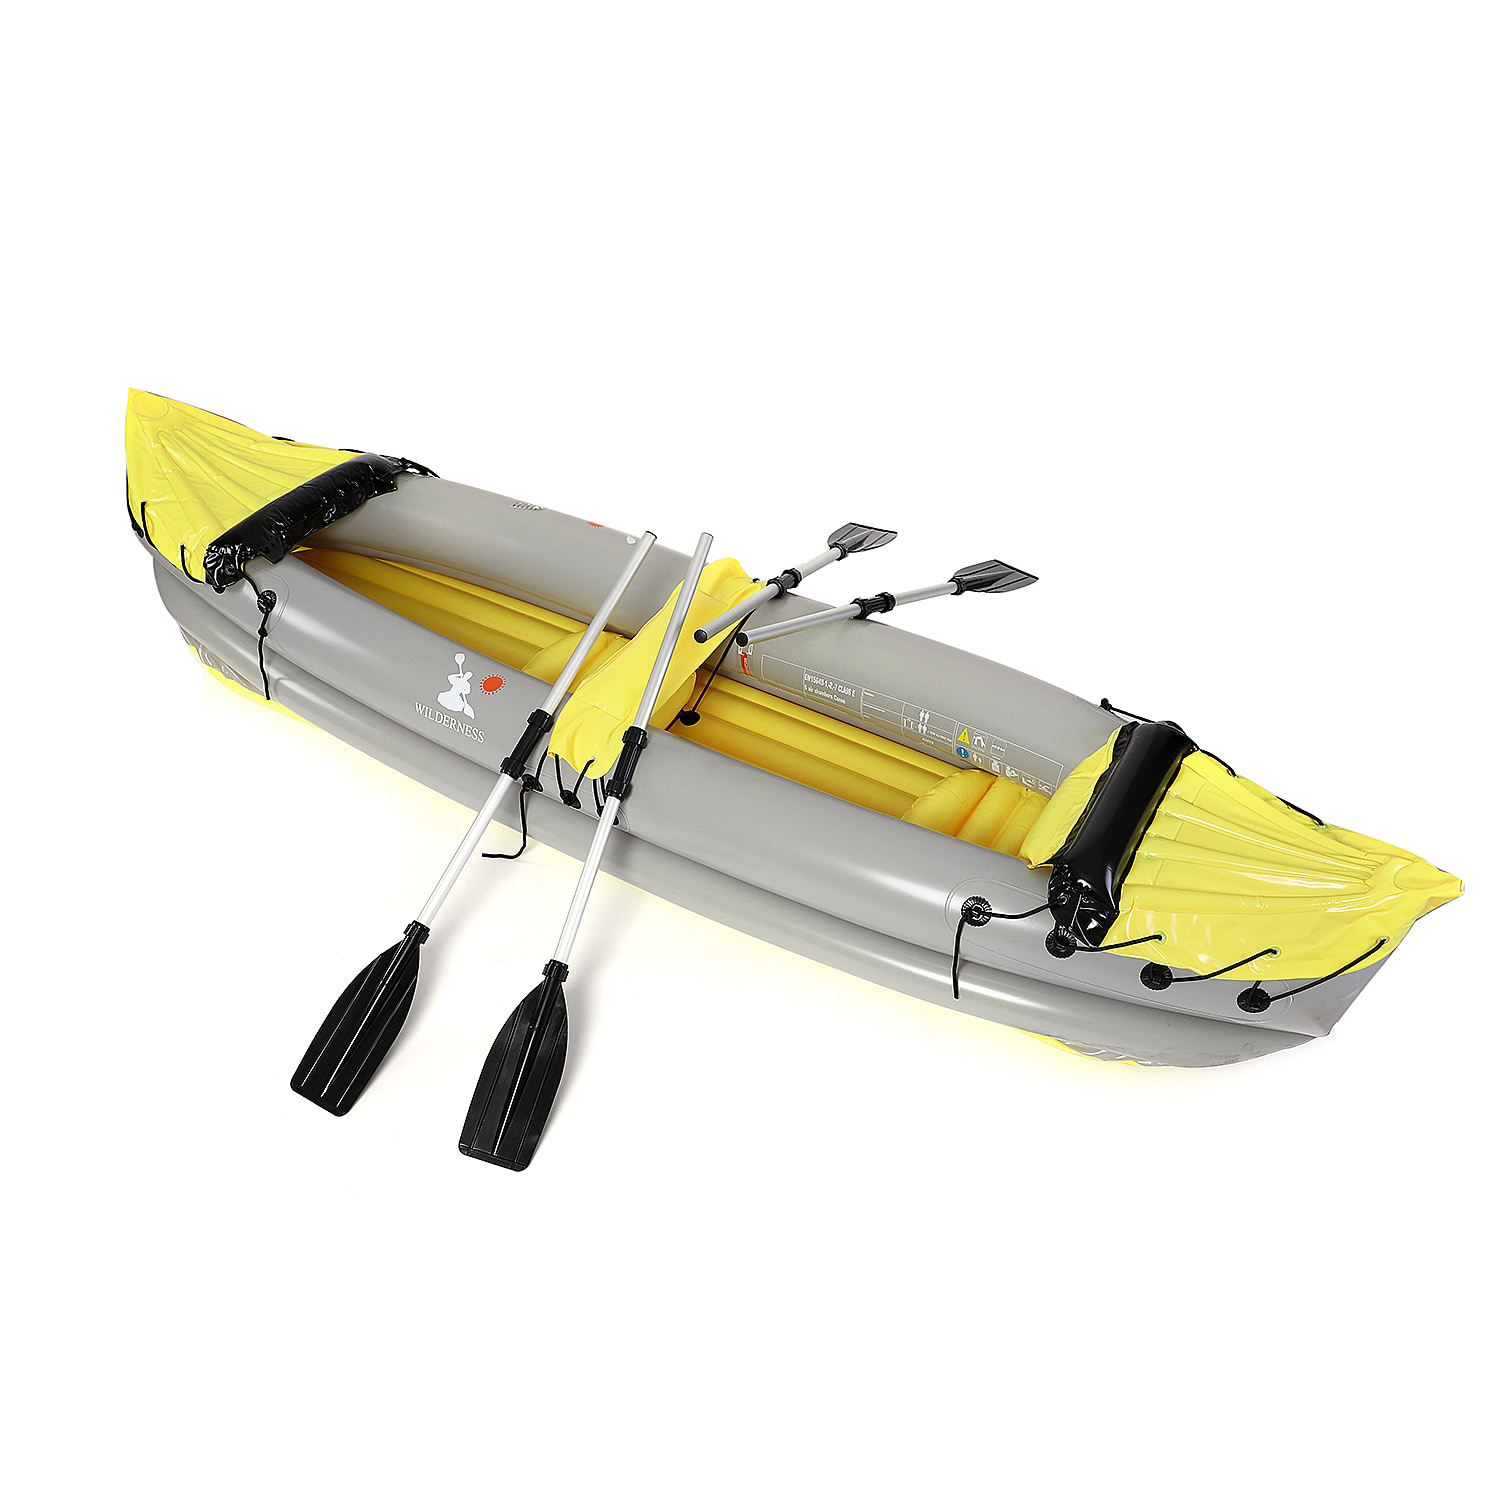 Wilderness-Inflatable-Kayak-Boat-With-Aluminum-Alloy-Oar-and-Air-Pump